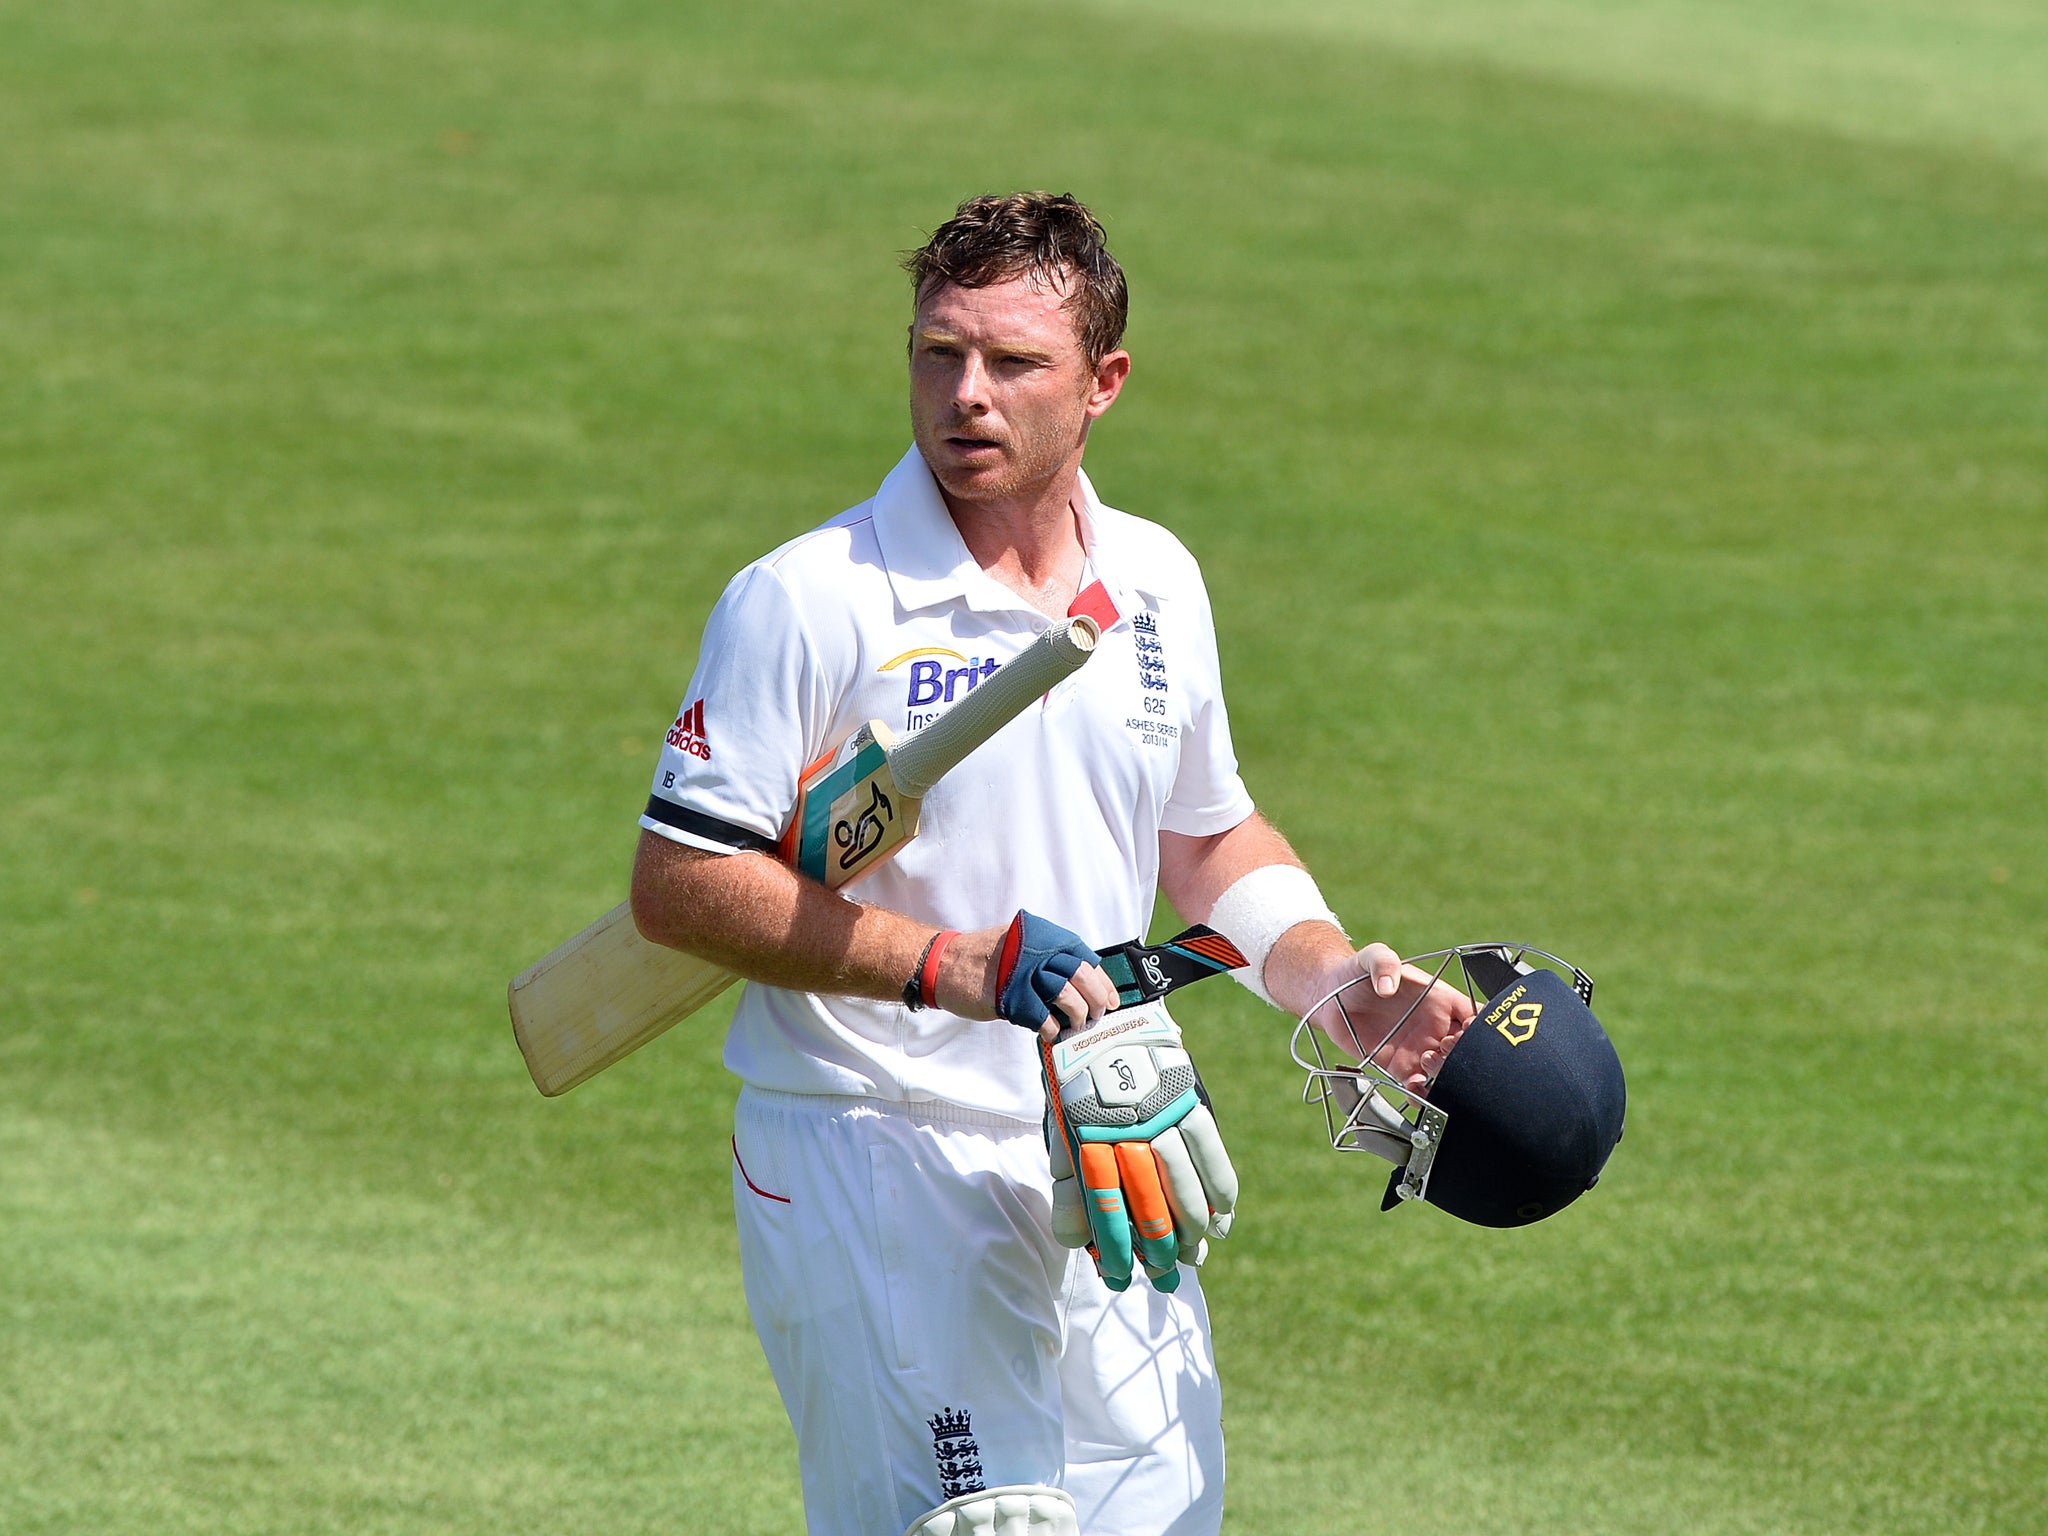 England batsman Ian Bell has said the team have "no excuses" following their dismal performance in the first innings of the Second Ashes Test